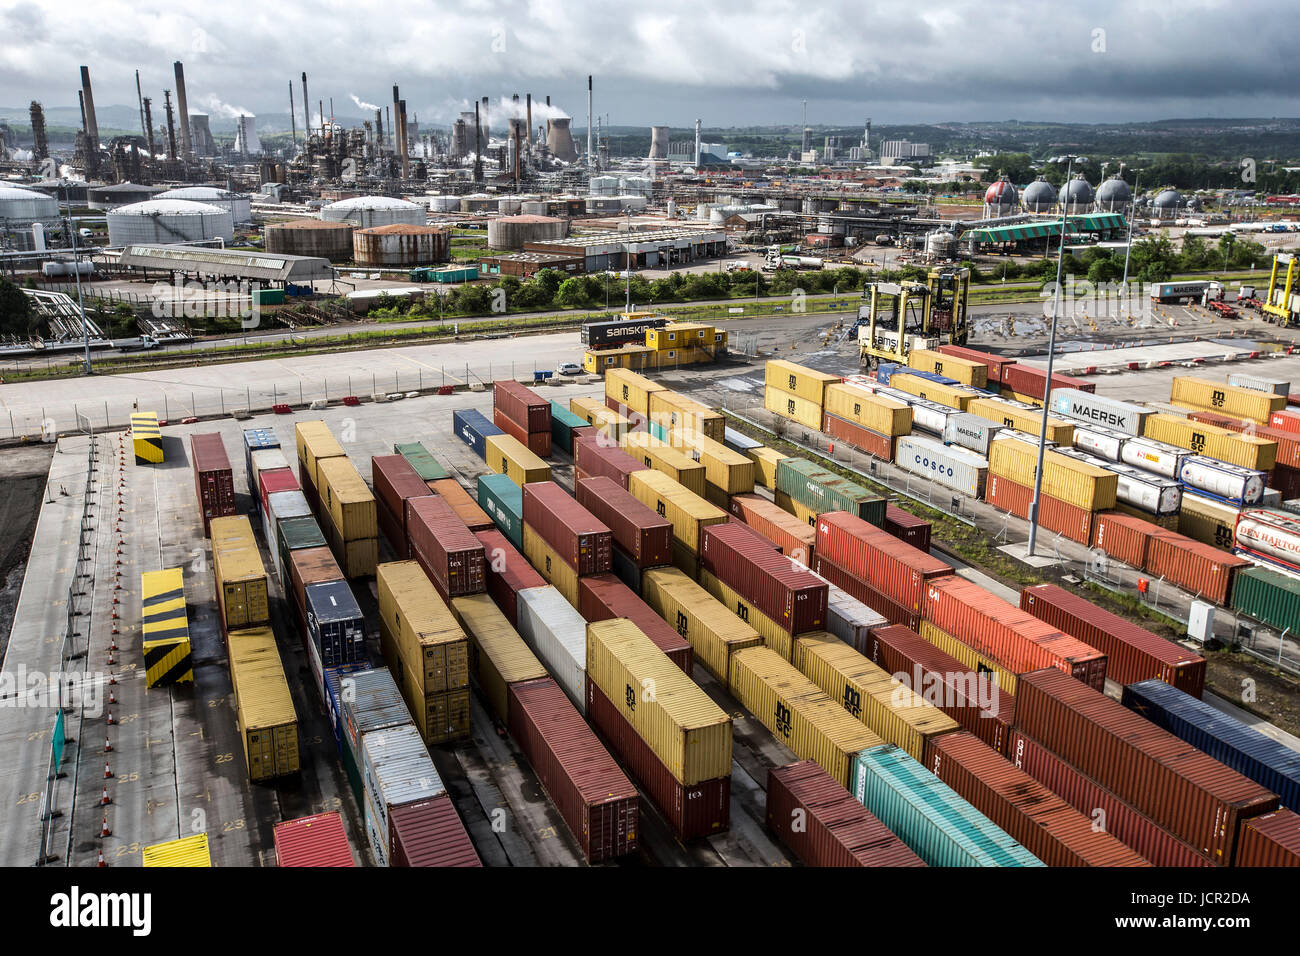 Containers at port showing Grangemouth Industrial complex in background Stock Photo